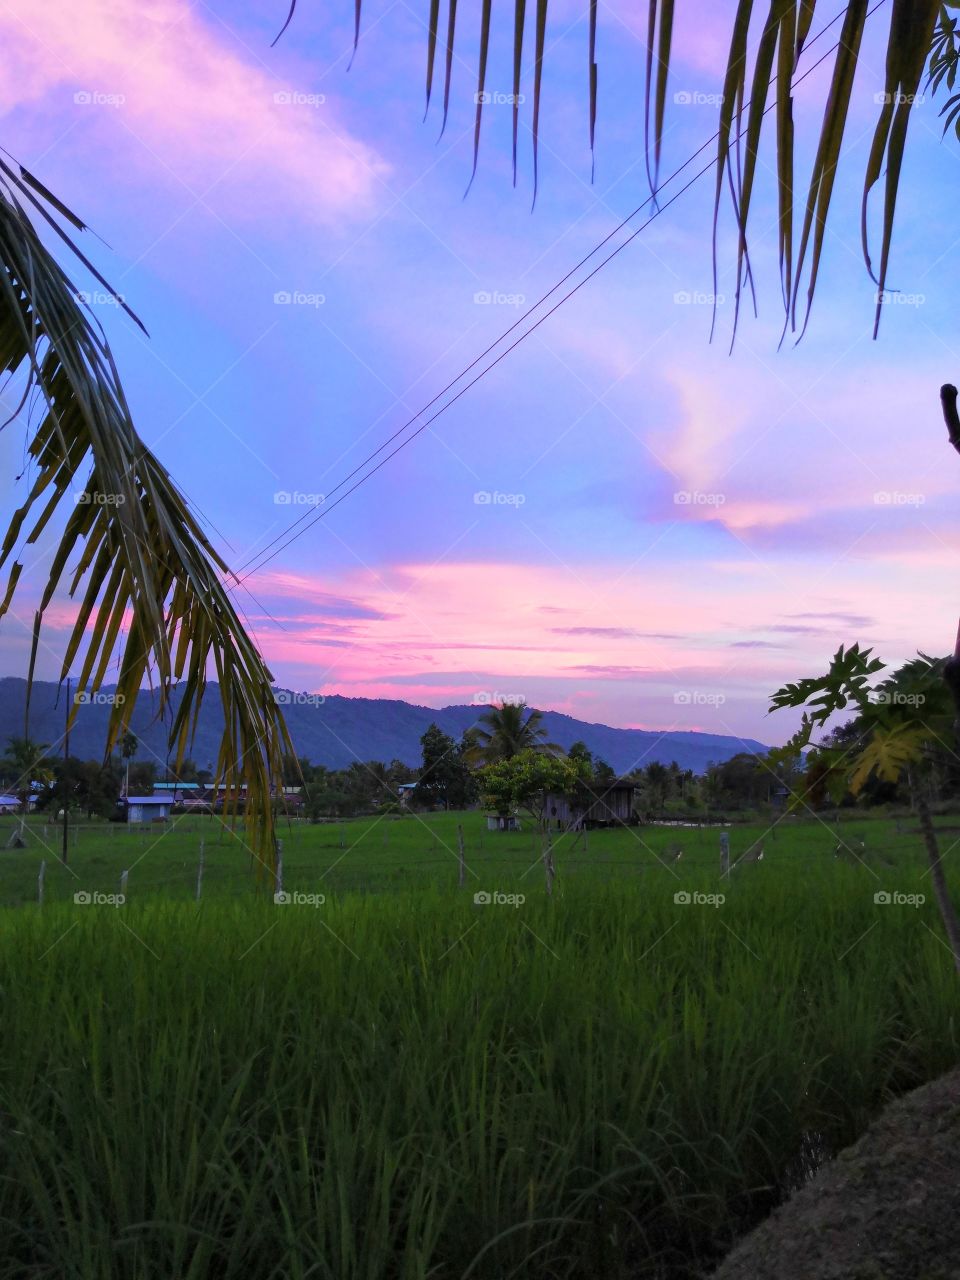 Scenery view during sun set.. The paddy field look so beautiful.